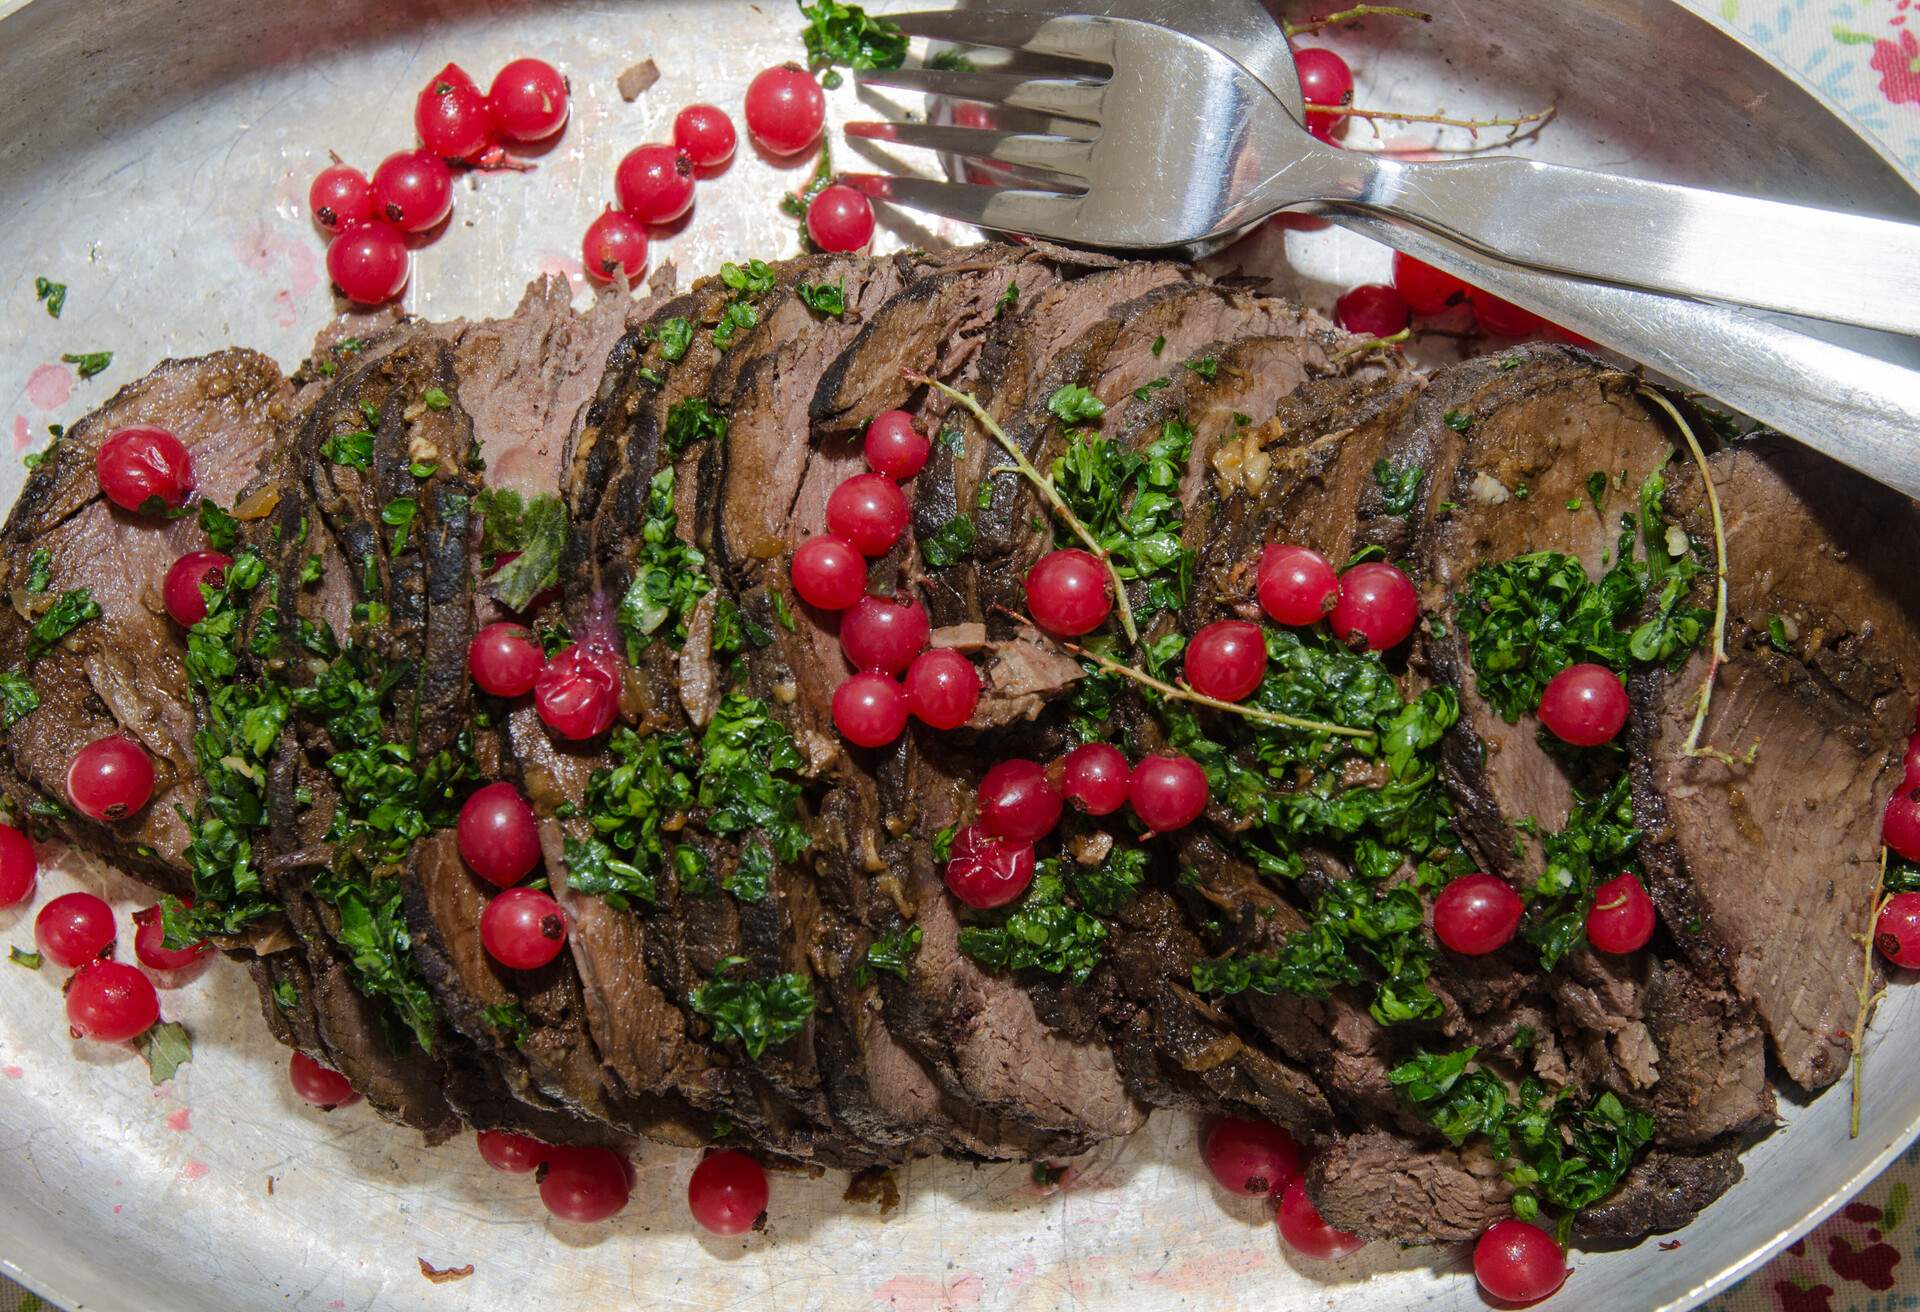 Moose steak ready to serve in form of slices with red currants and parsley